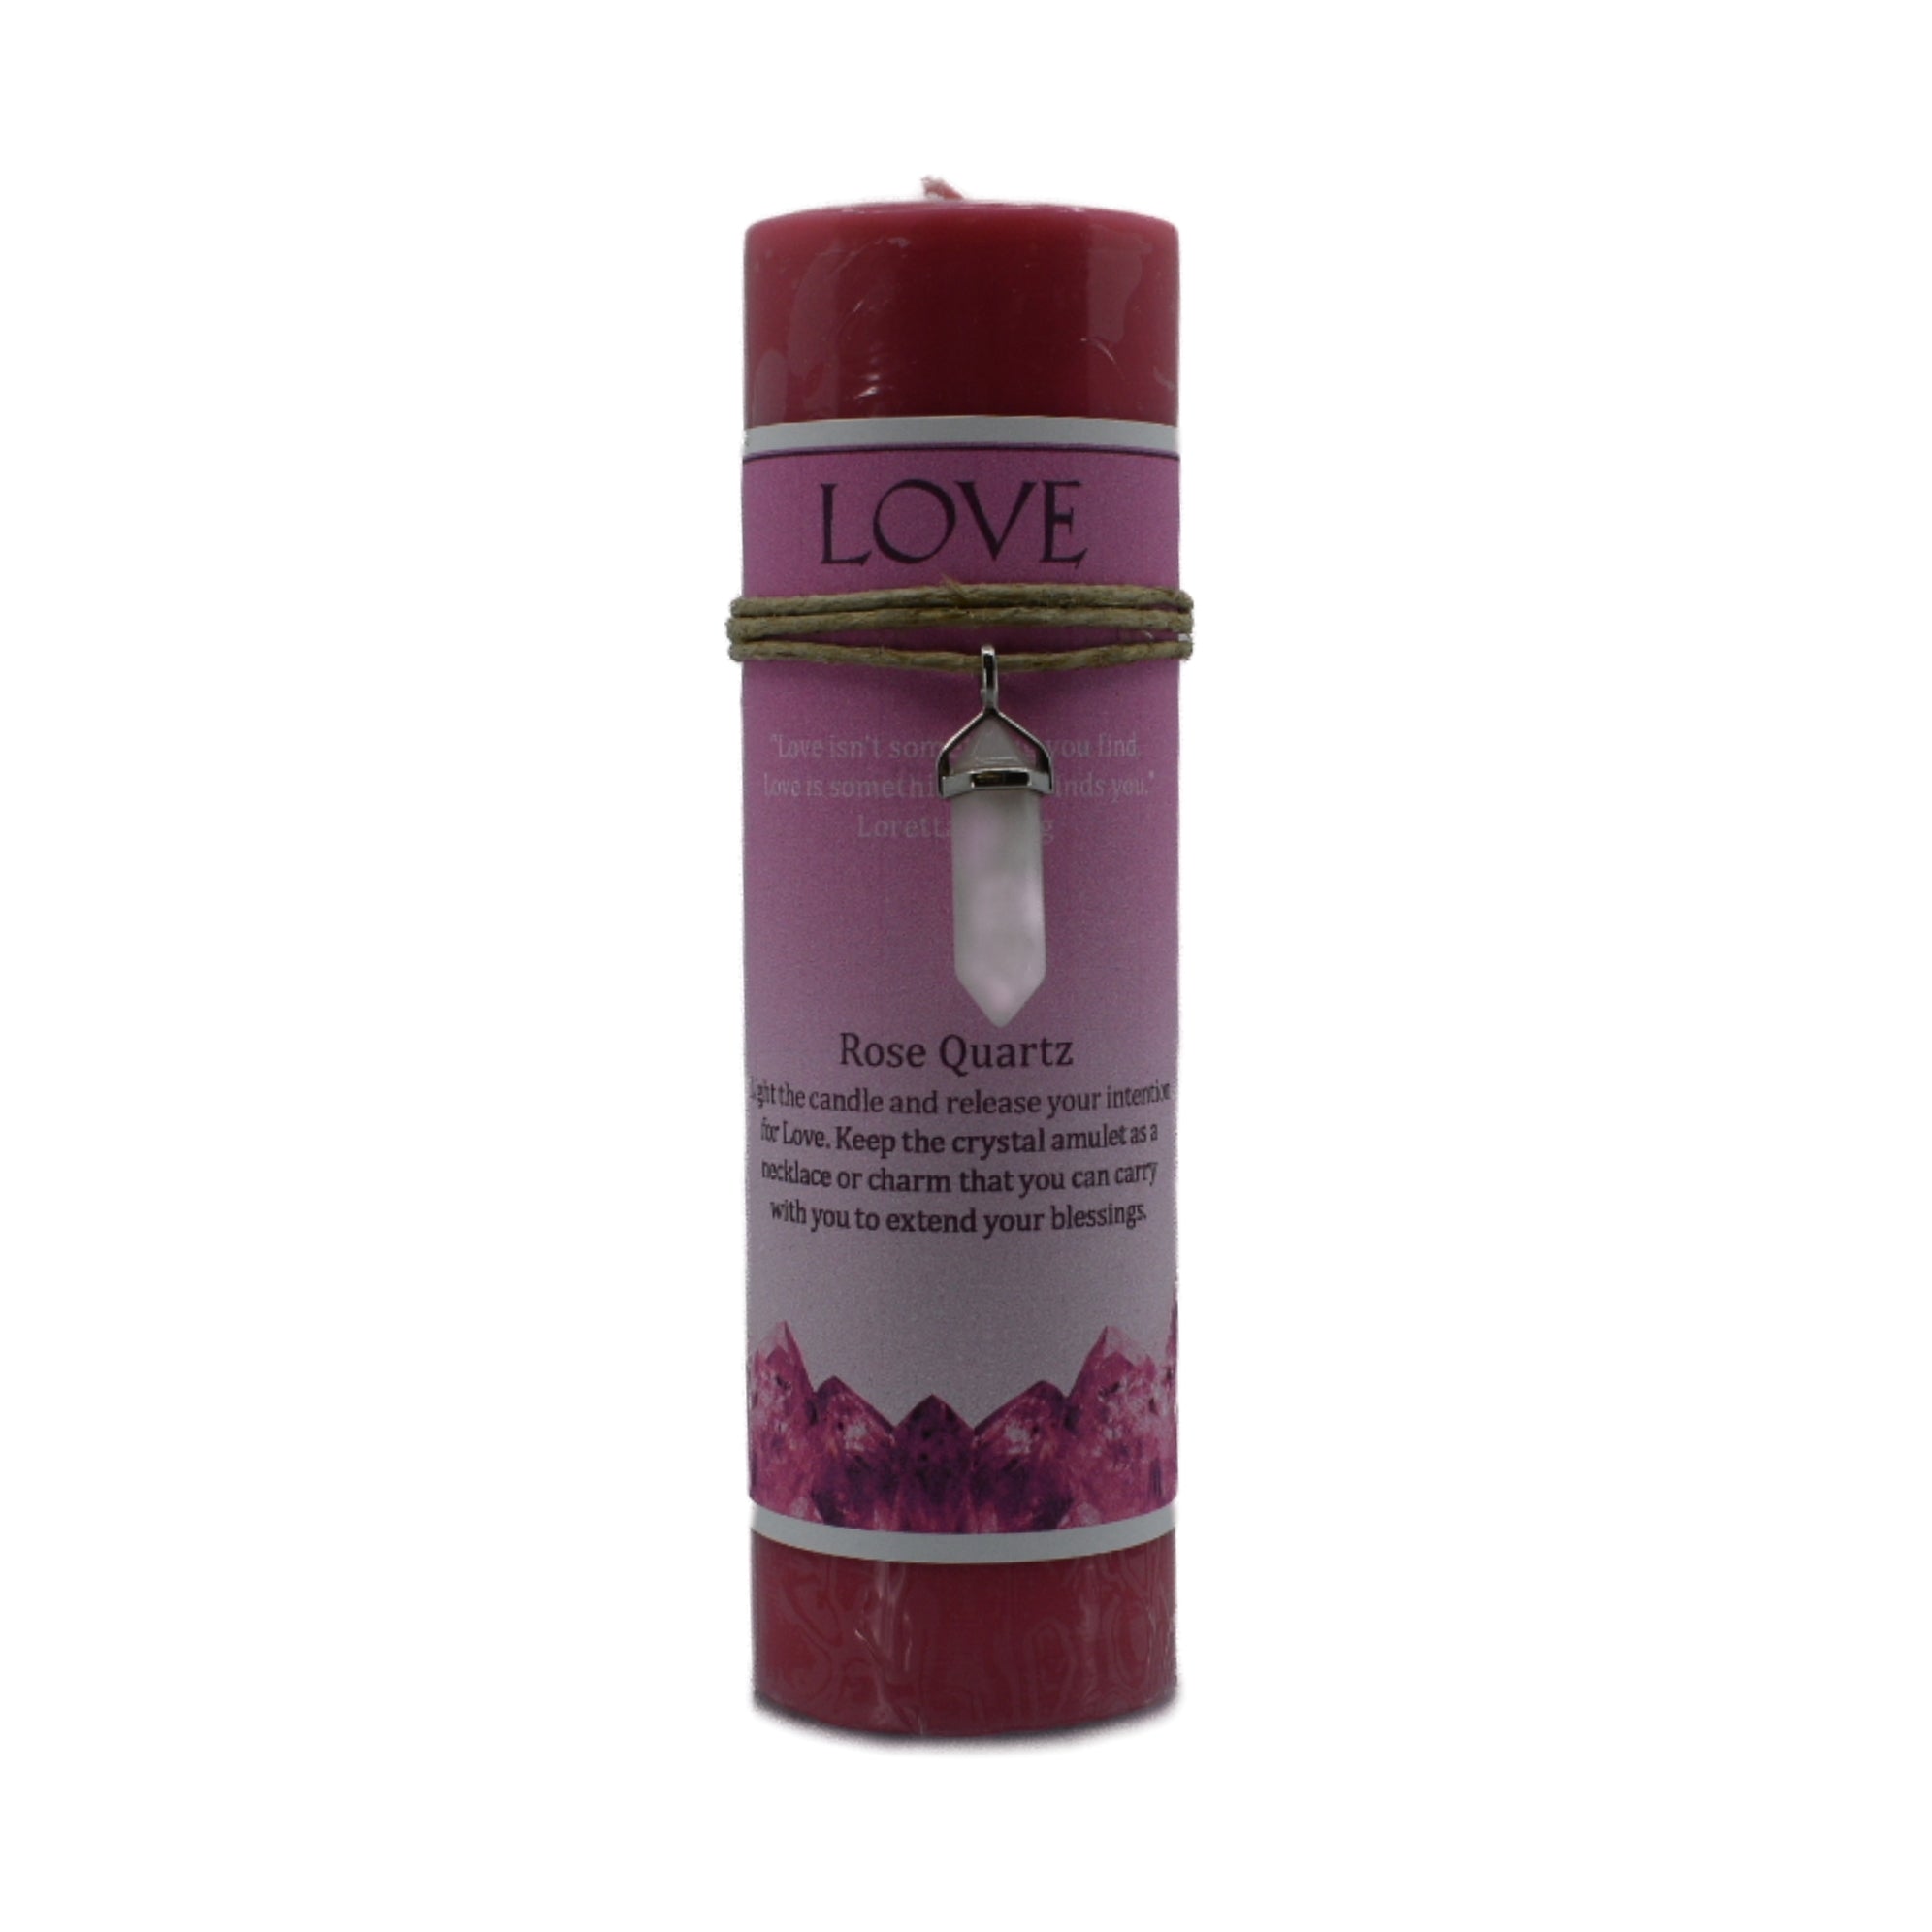 Love Crystal Pendant Candle.  Light the candle to release the intention for love.  The pendant has a double pointed rose amethyst crystal that can be worn as a necklace or used as an amulet.  The candle is pink and is scented with jasmine.